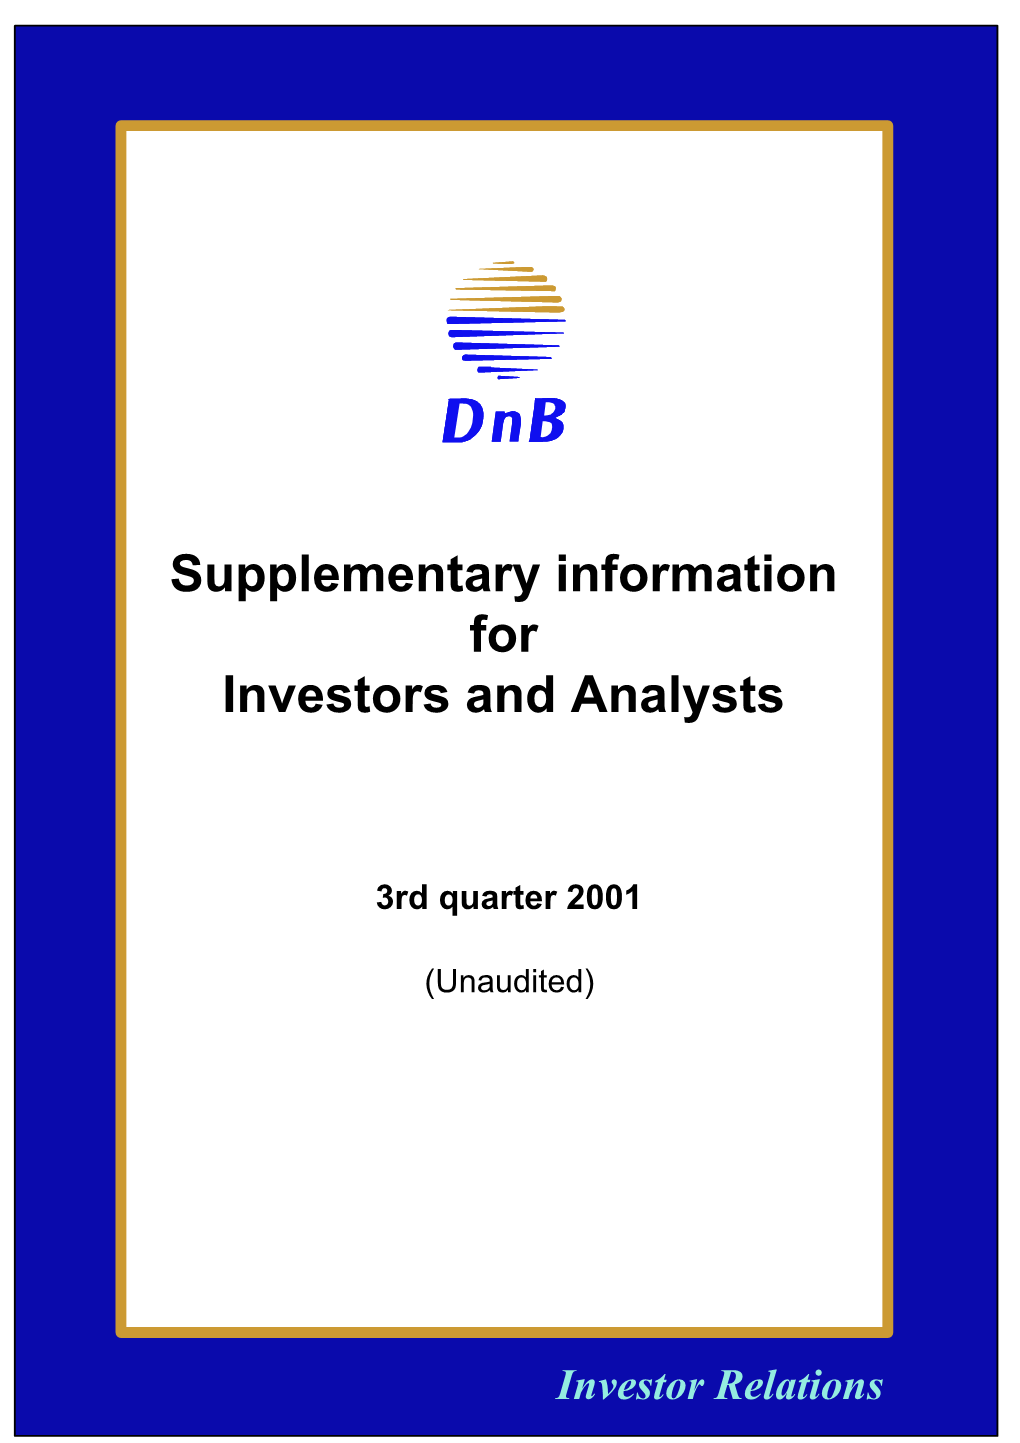 Supplementary Information for Investors and Analysts